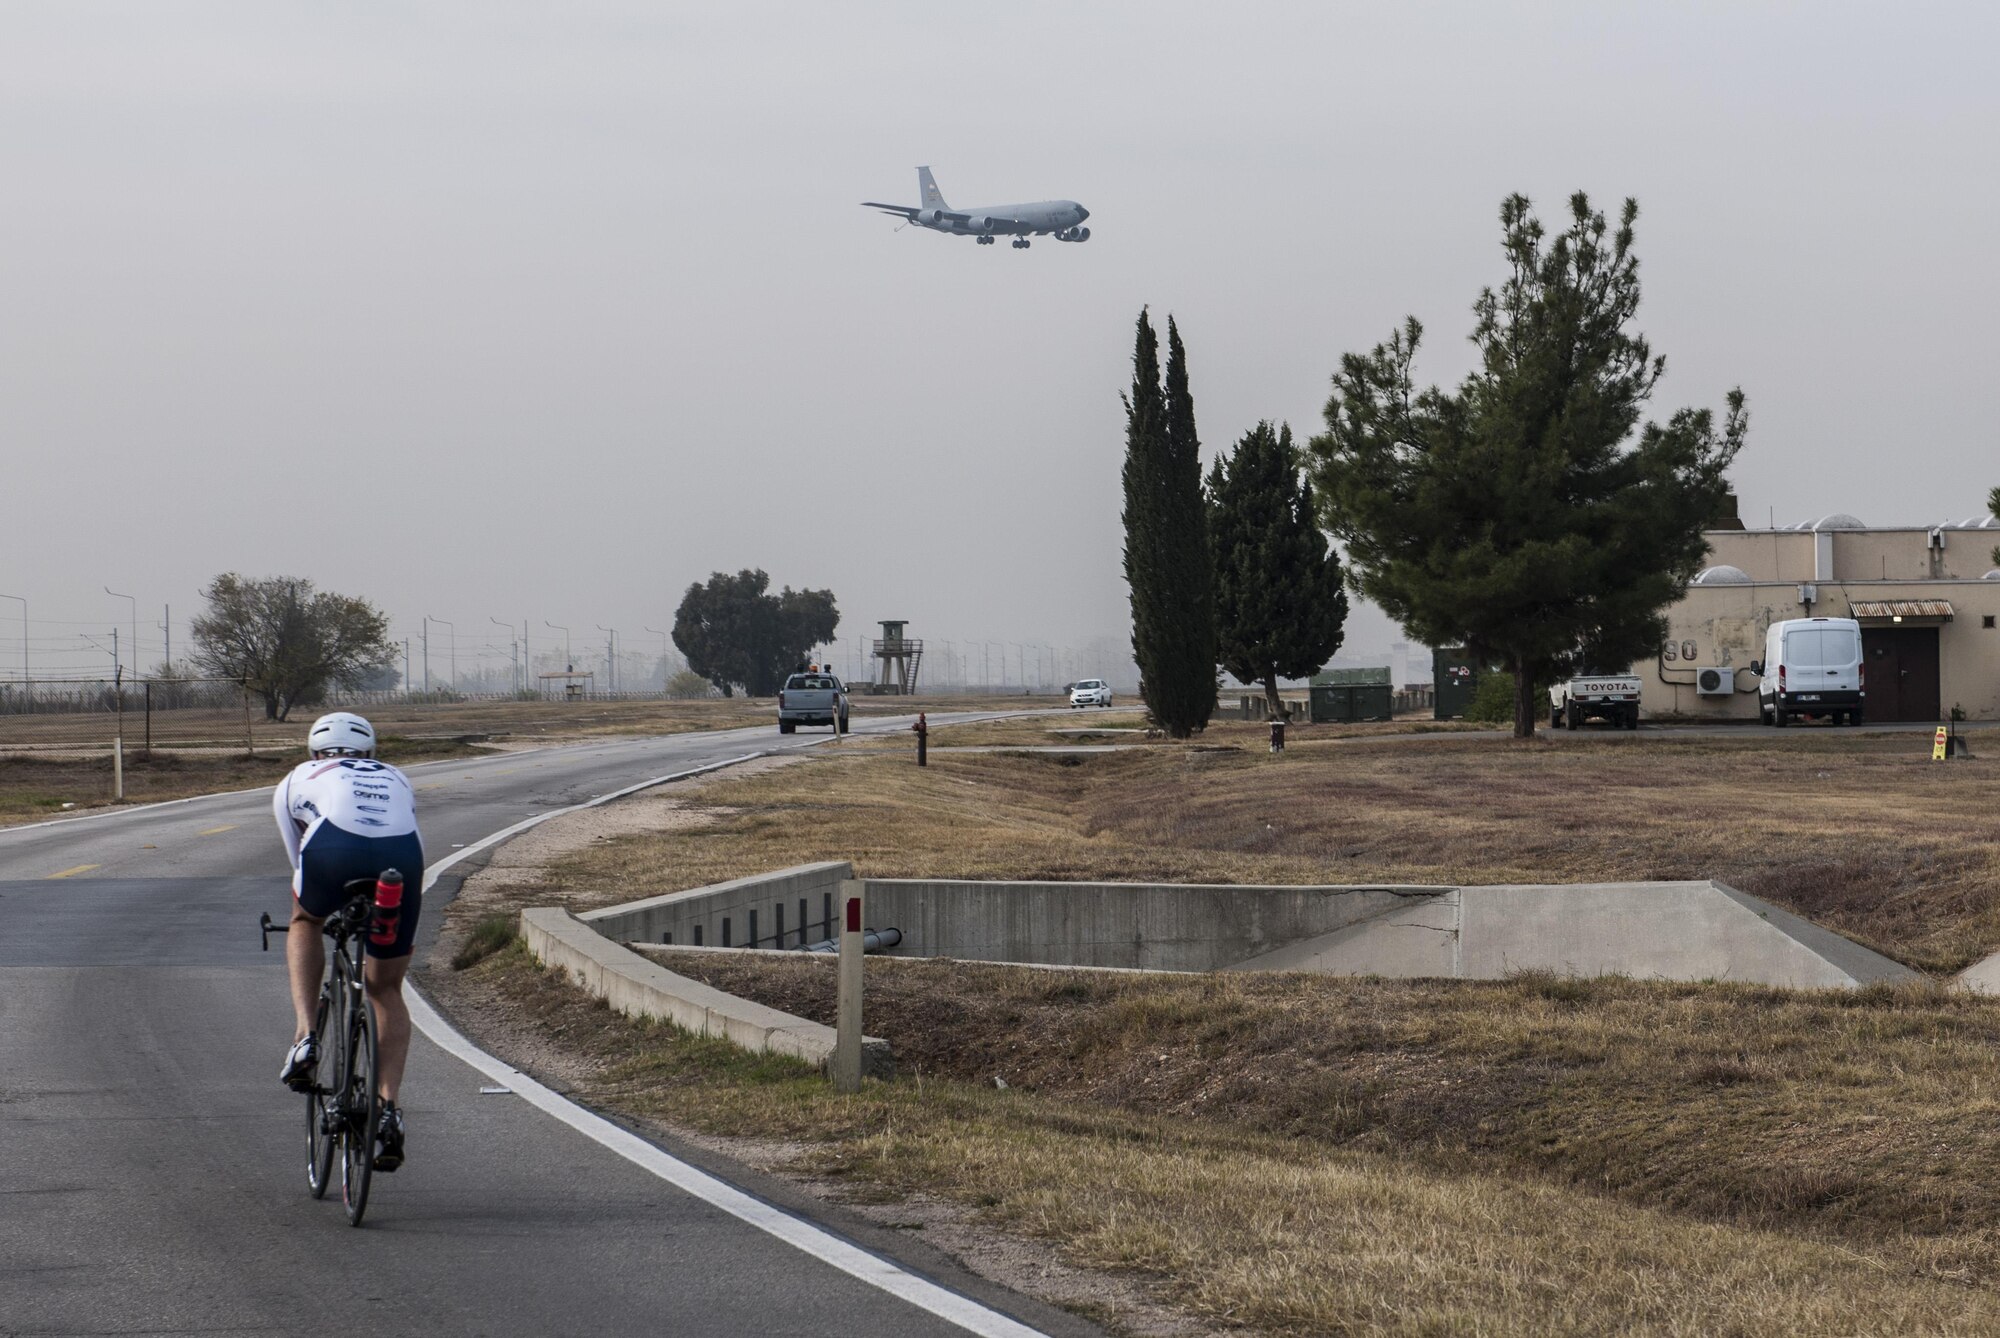 Senior Master Sgt. Jason Chiasson, the 39th Communications Squadron production superintendent, rides past the flightline at Incirlik Air Base, Turkey, Dec. 10, 2015. Chiasson, a member of the Air Force Cycling Team, regularly cycles a variety distances both indoors and outdoors to stay prepared for the races he will participate in as part of the cycling team. (U.S. Air Force photo/Senior Airman Krystal Ardrey)